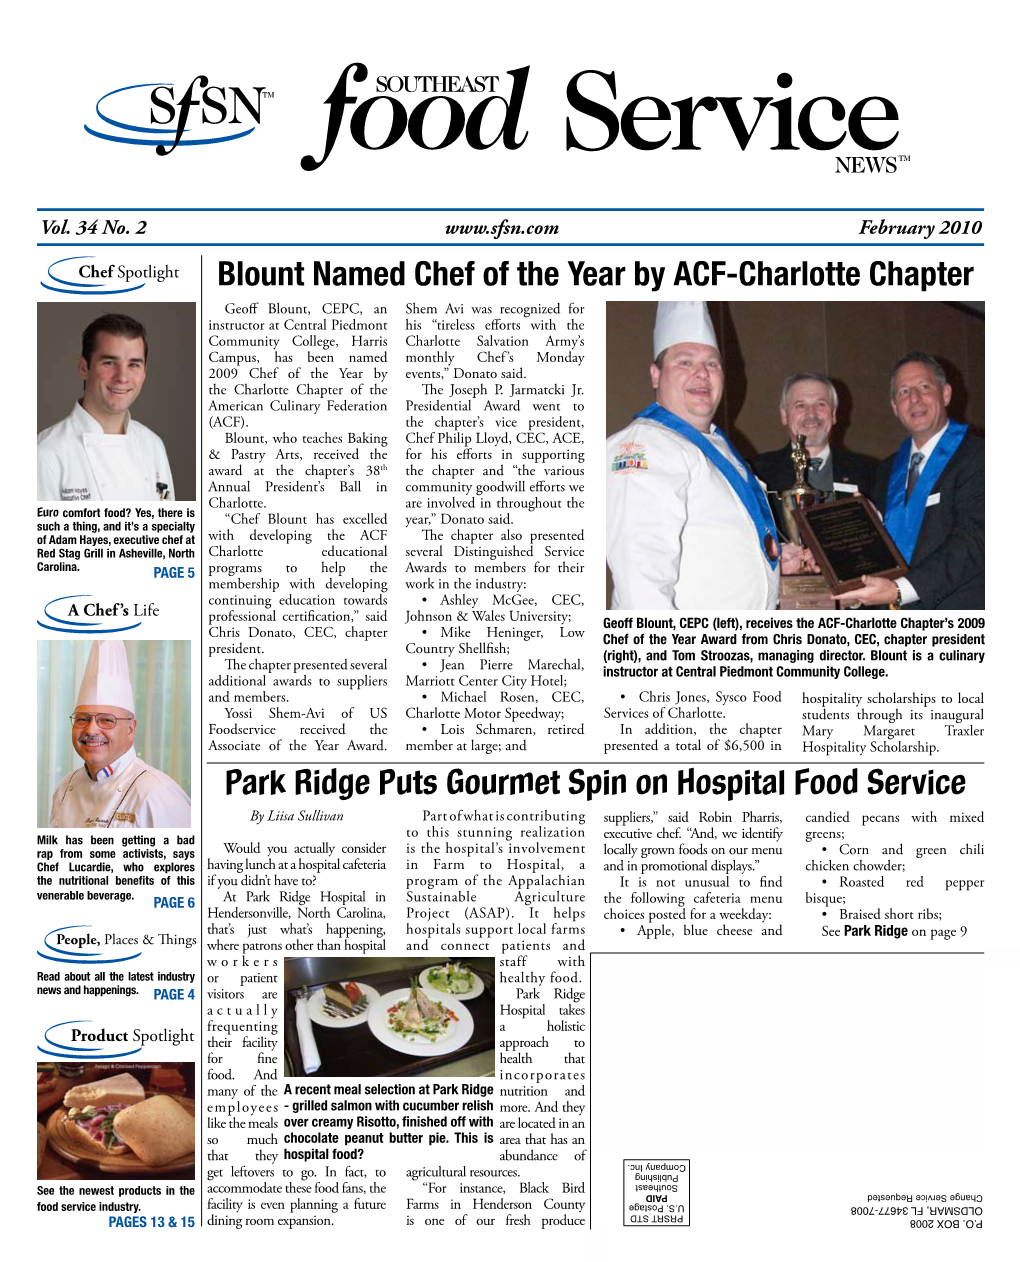 Blount Named Chef of the Year by ACF-Charlotte Chapter Park Ridge